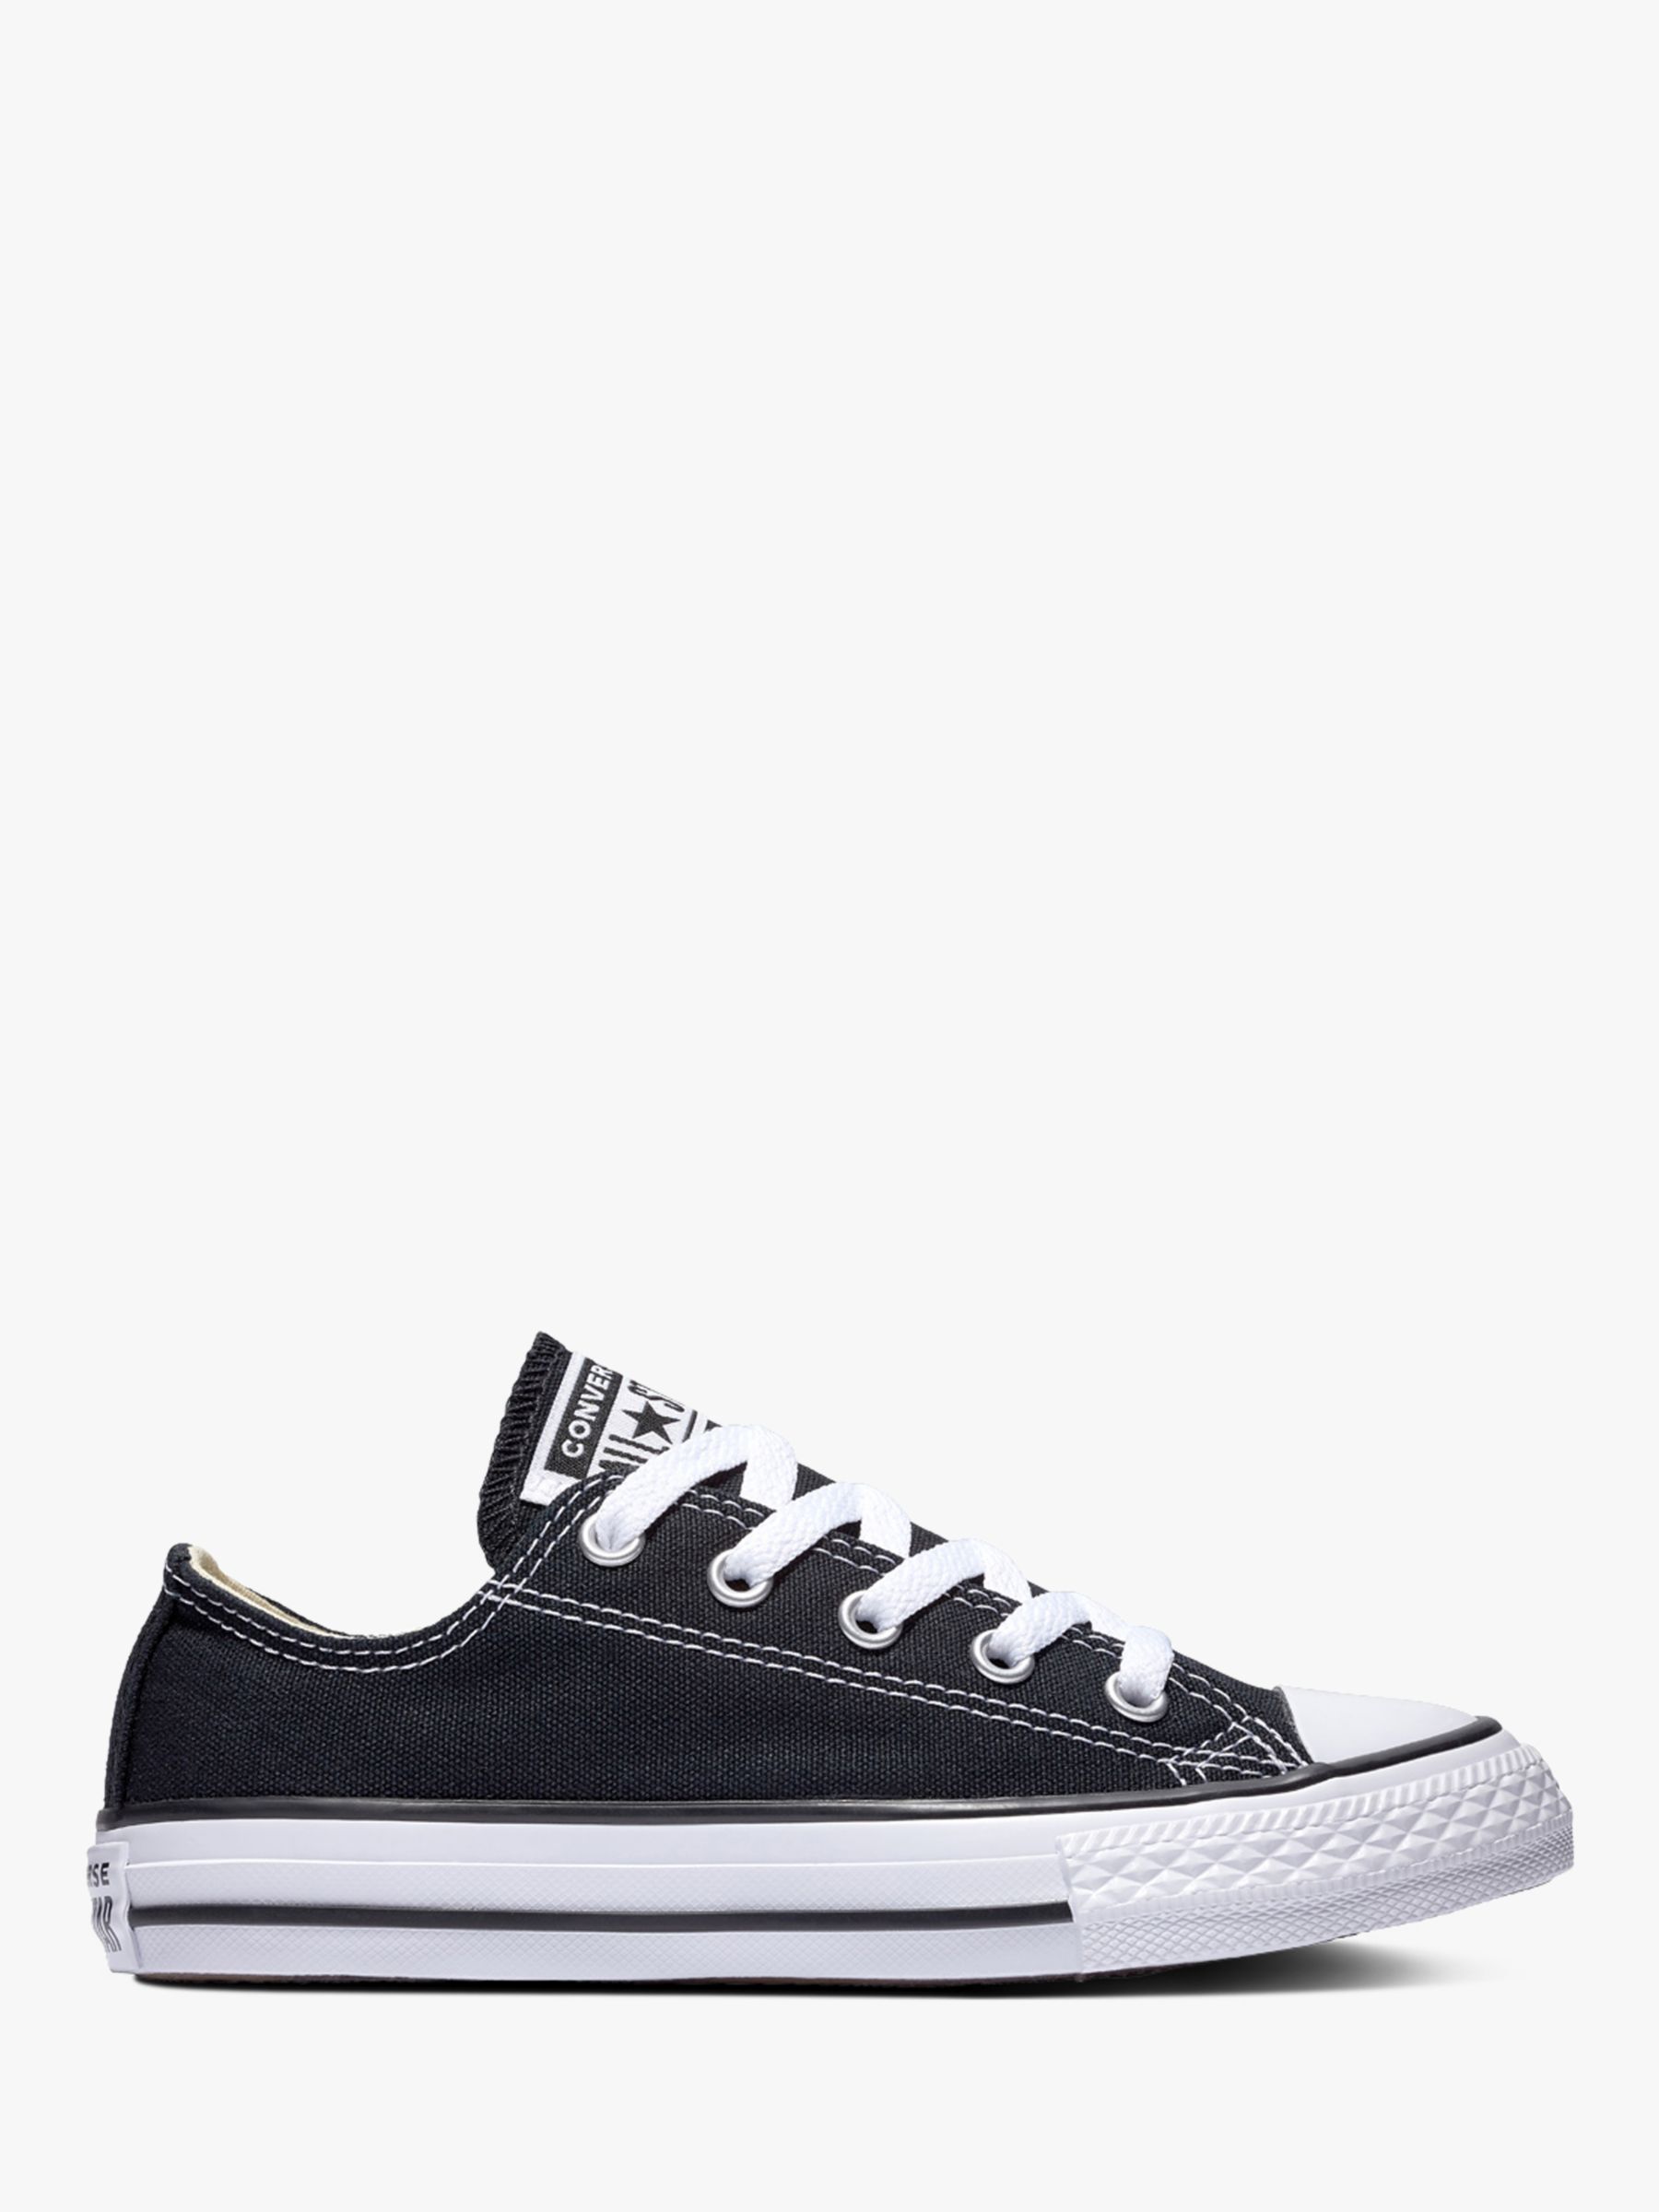 Converse Children's Chuck Taylor All Star Trainers, Black at John Lewis ...